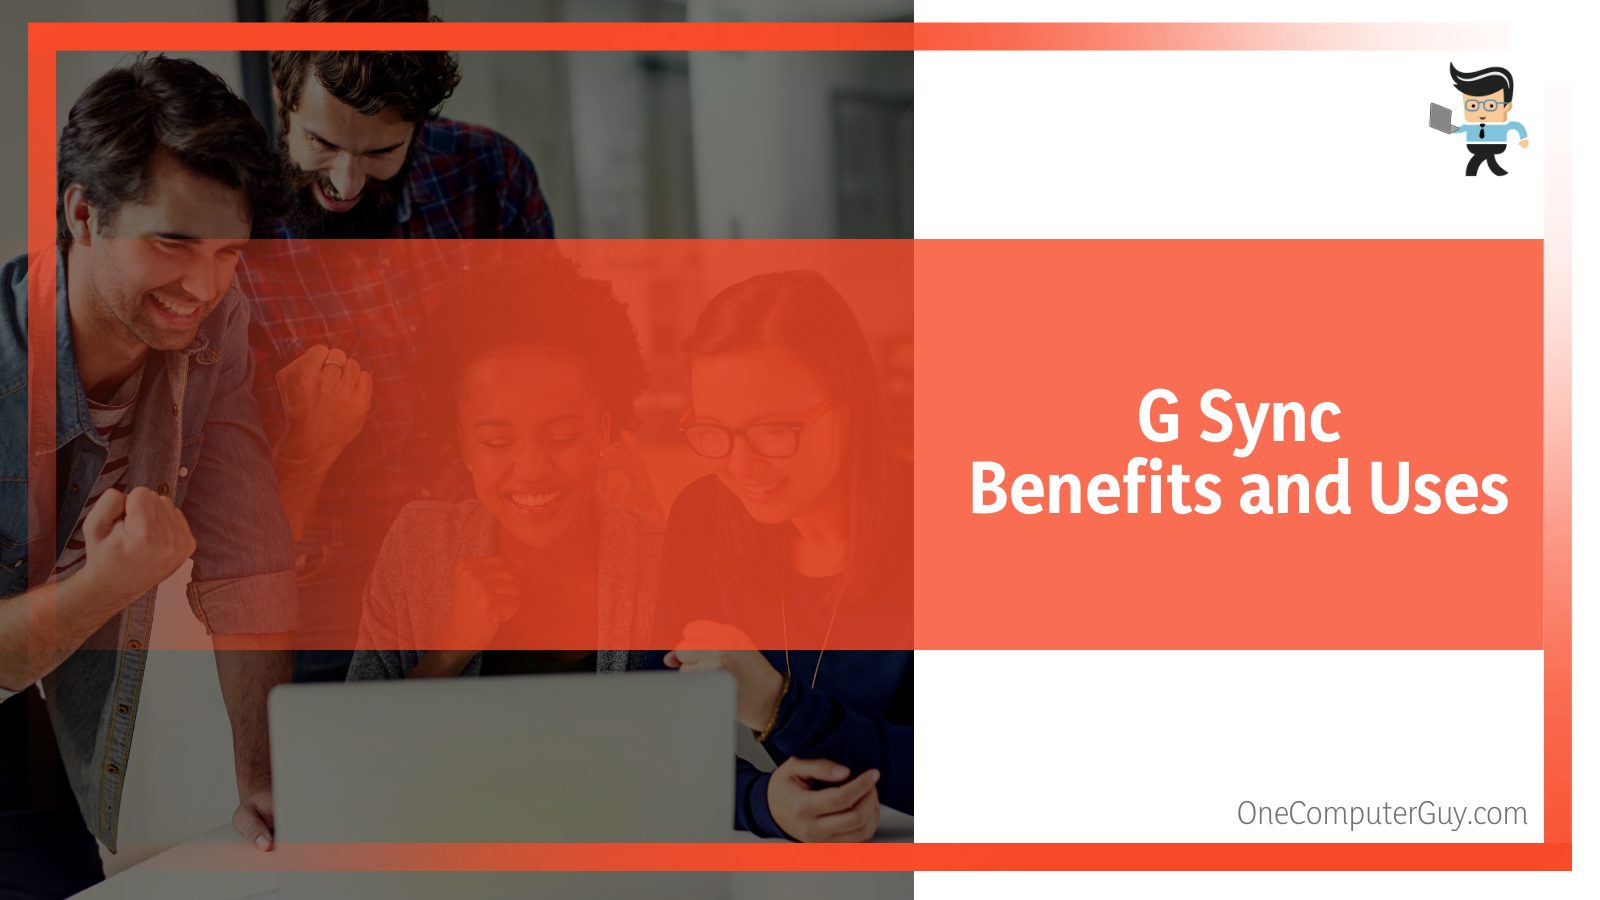 G Sync Benefits and Uses